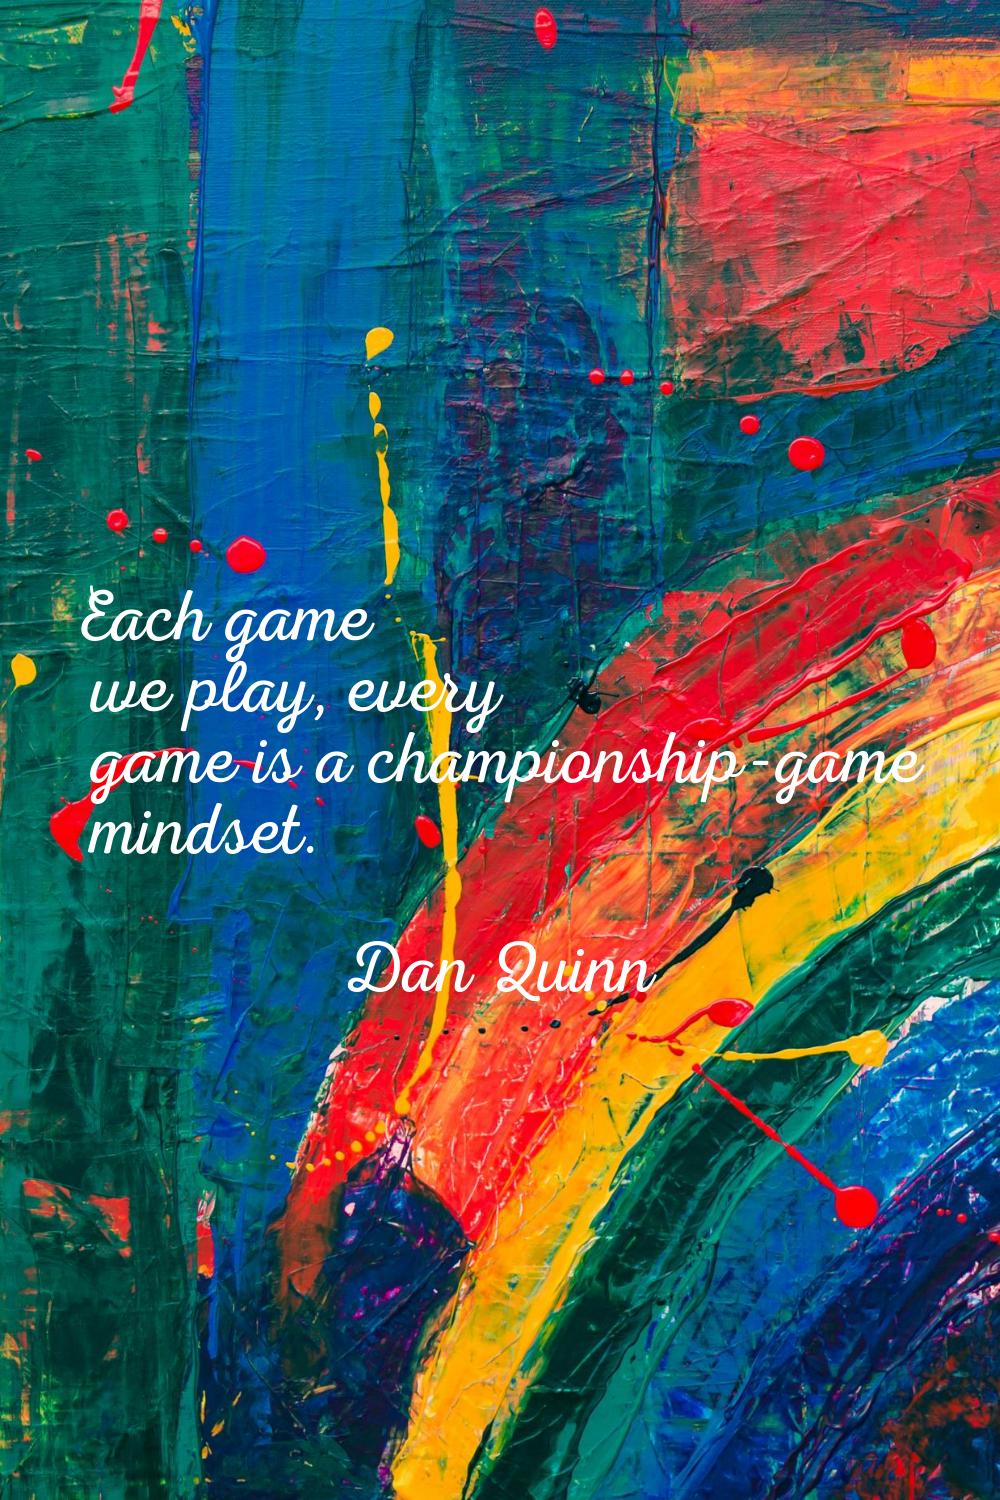 Each game we play, every game is a championship-game mindset.